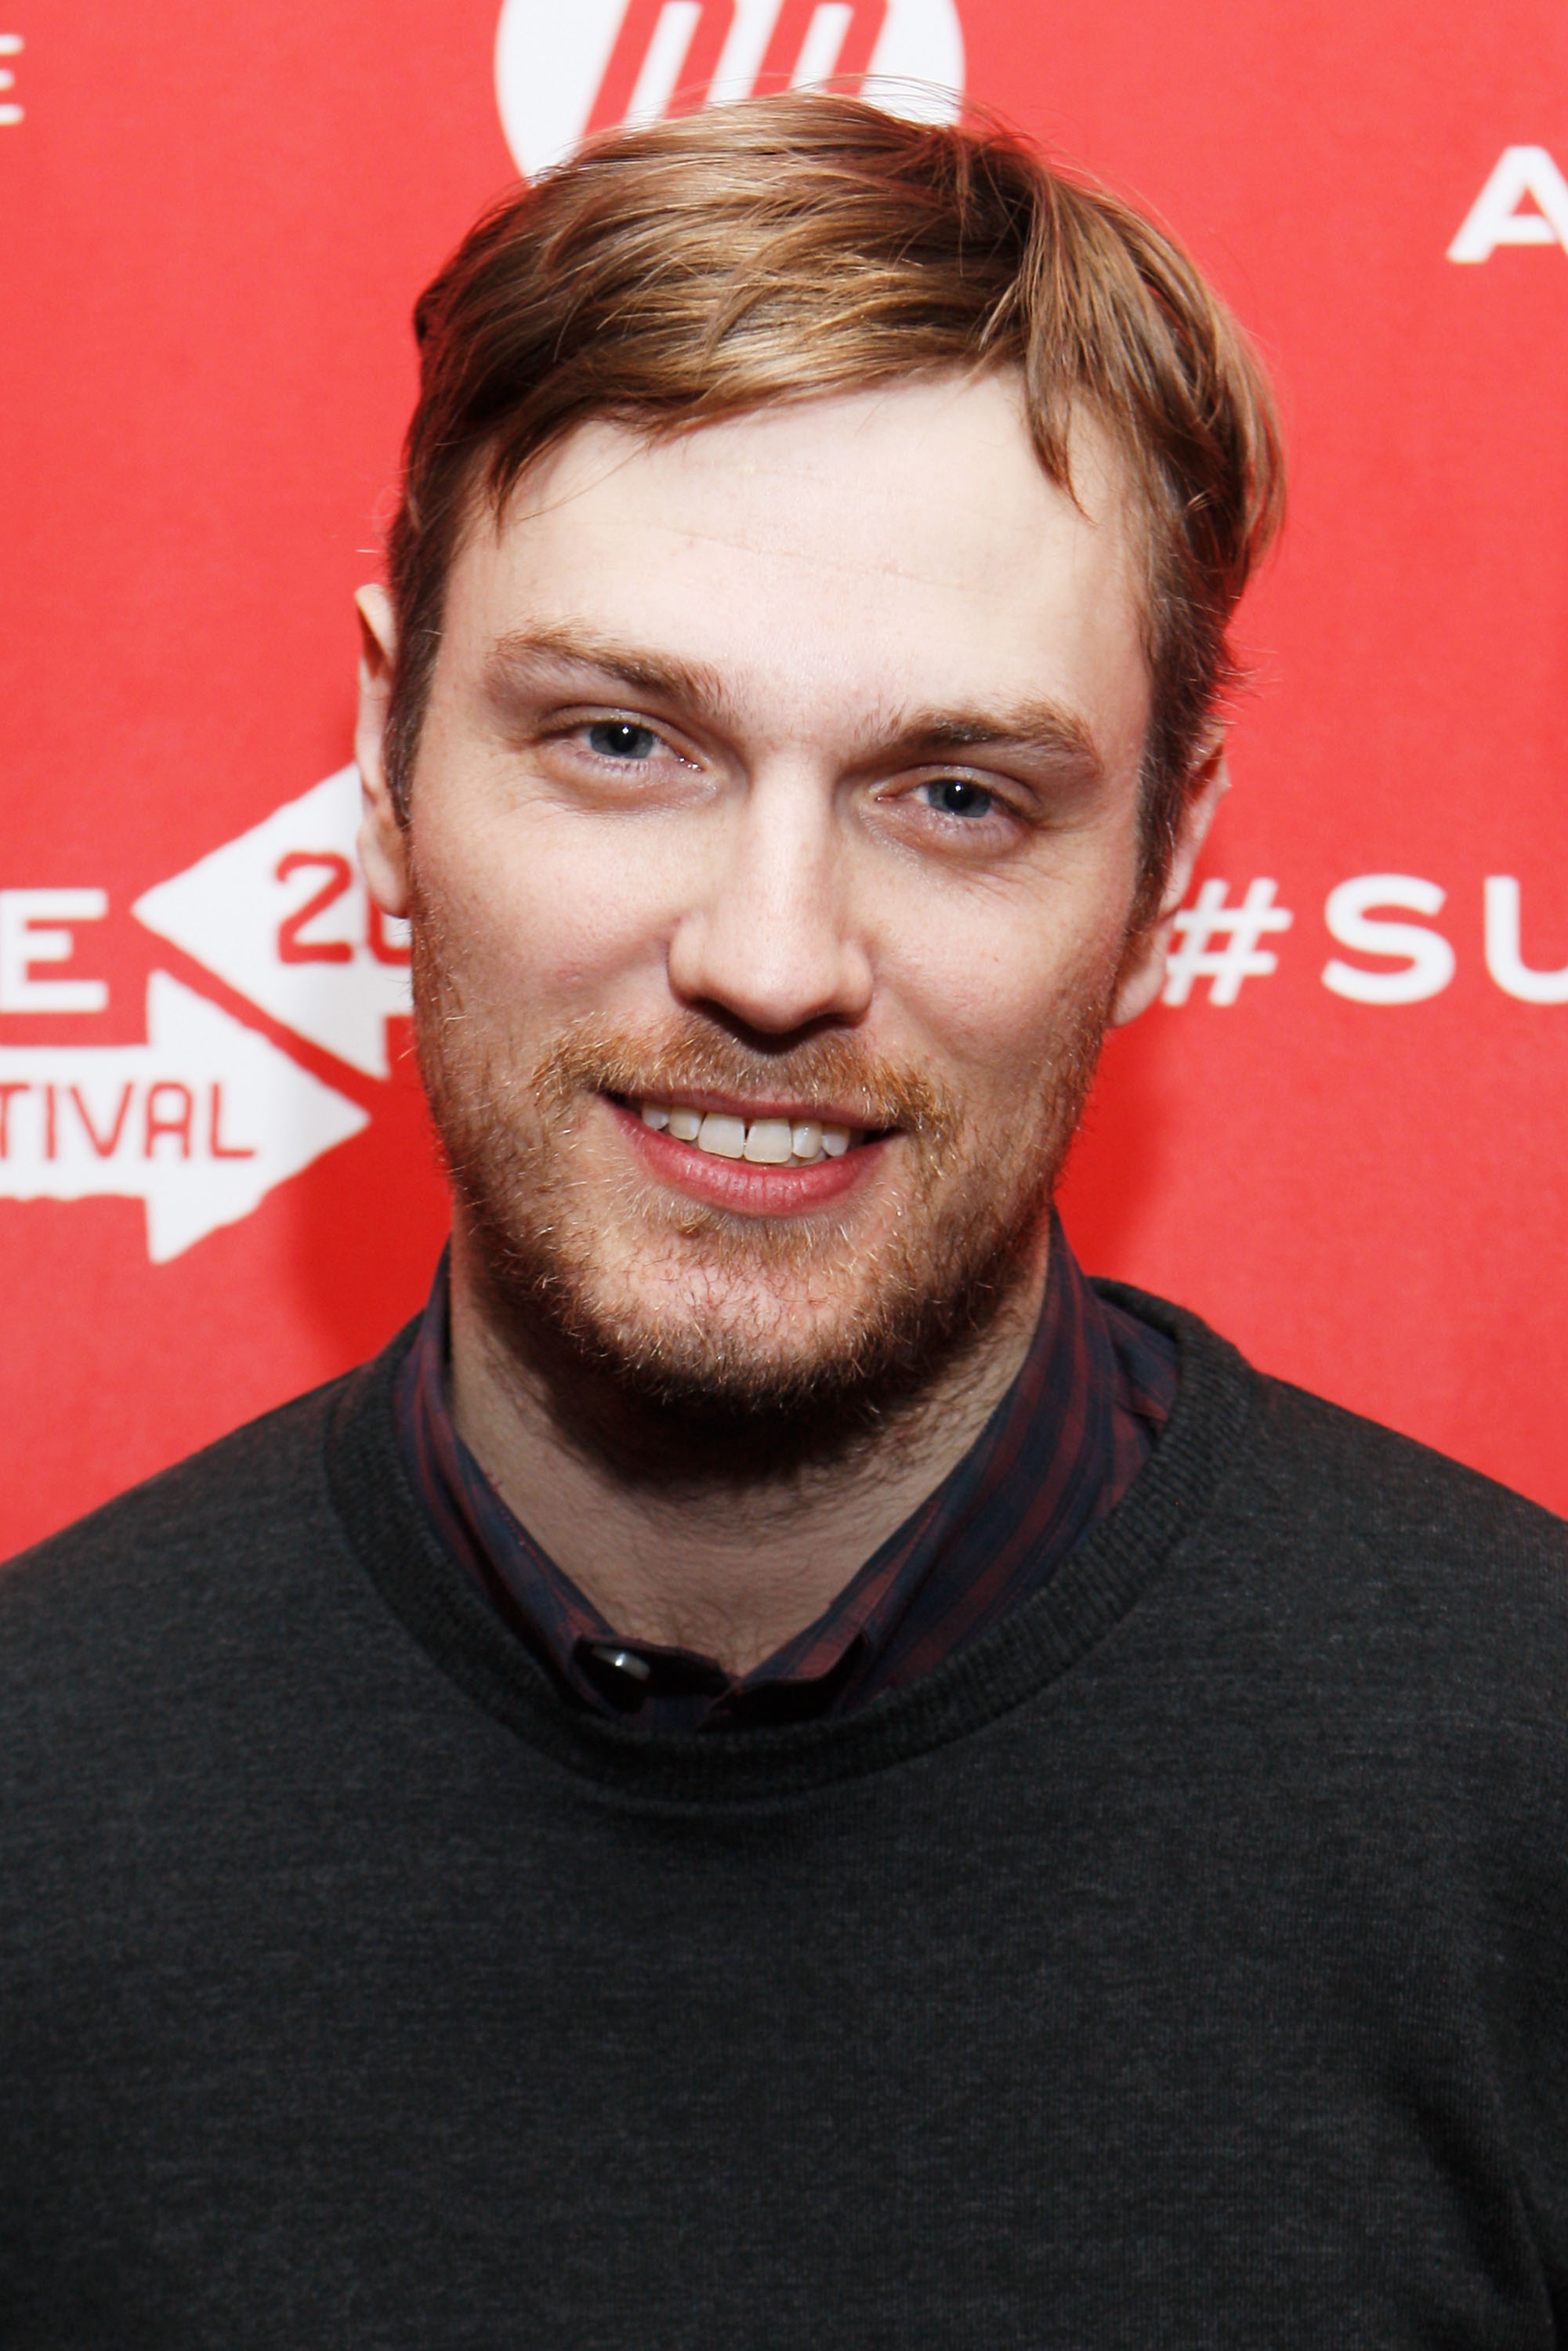 Zachary Heinzerling at Sundance 2013 - World Premiere of Cutie and the Boxer